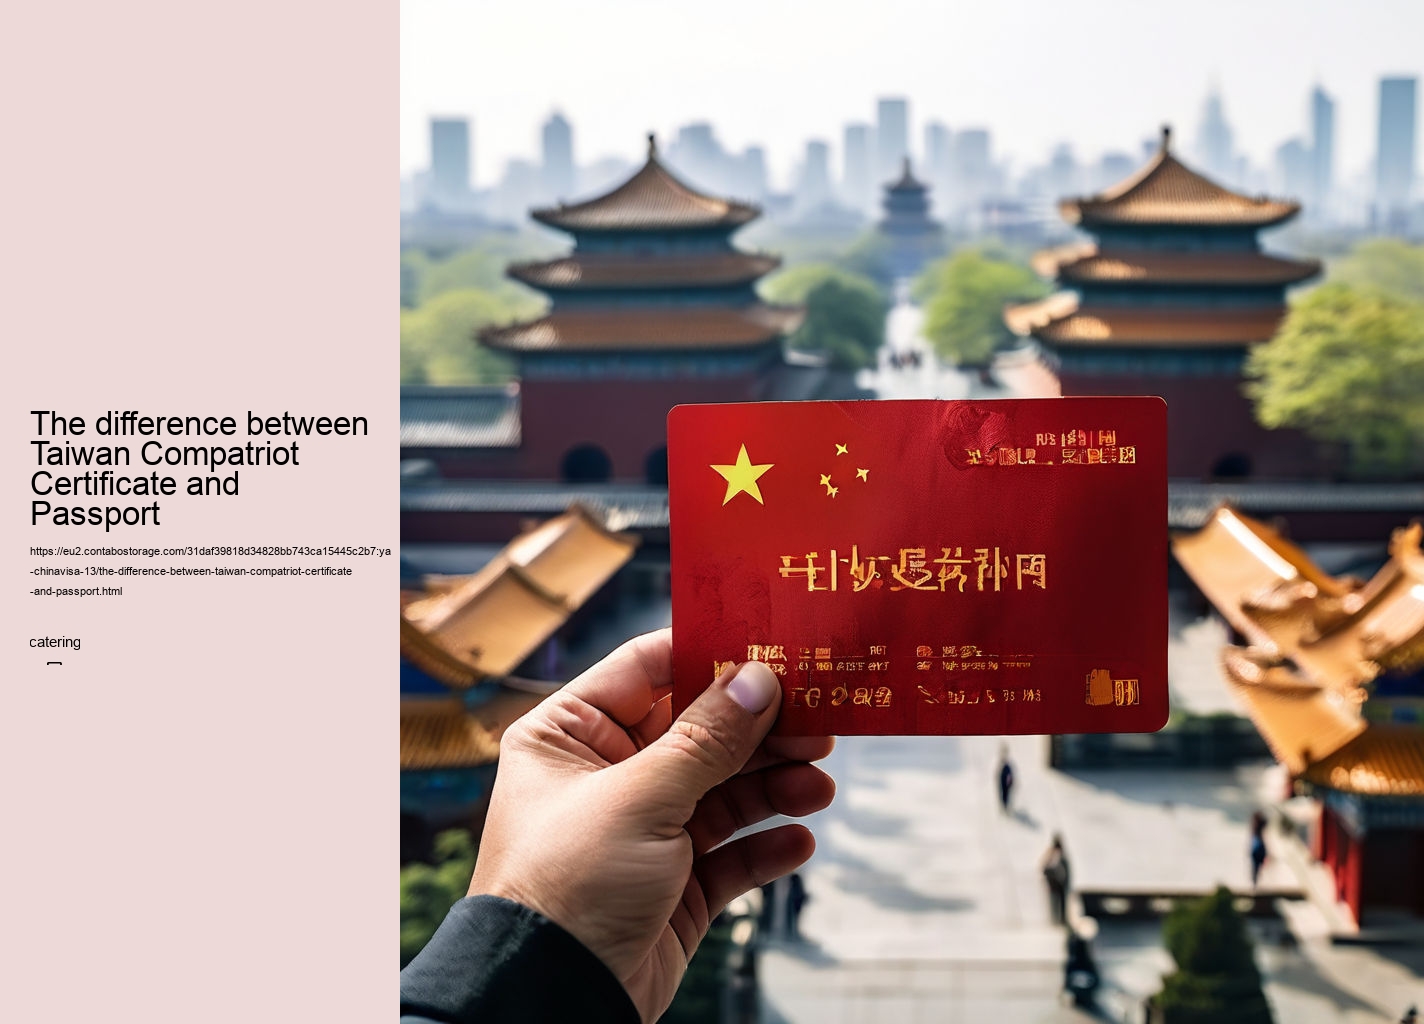 The difference between Taiwan Compatriot Certificate and Passport